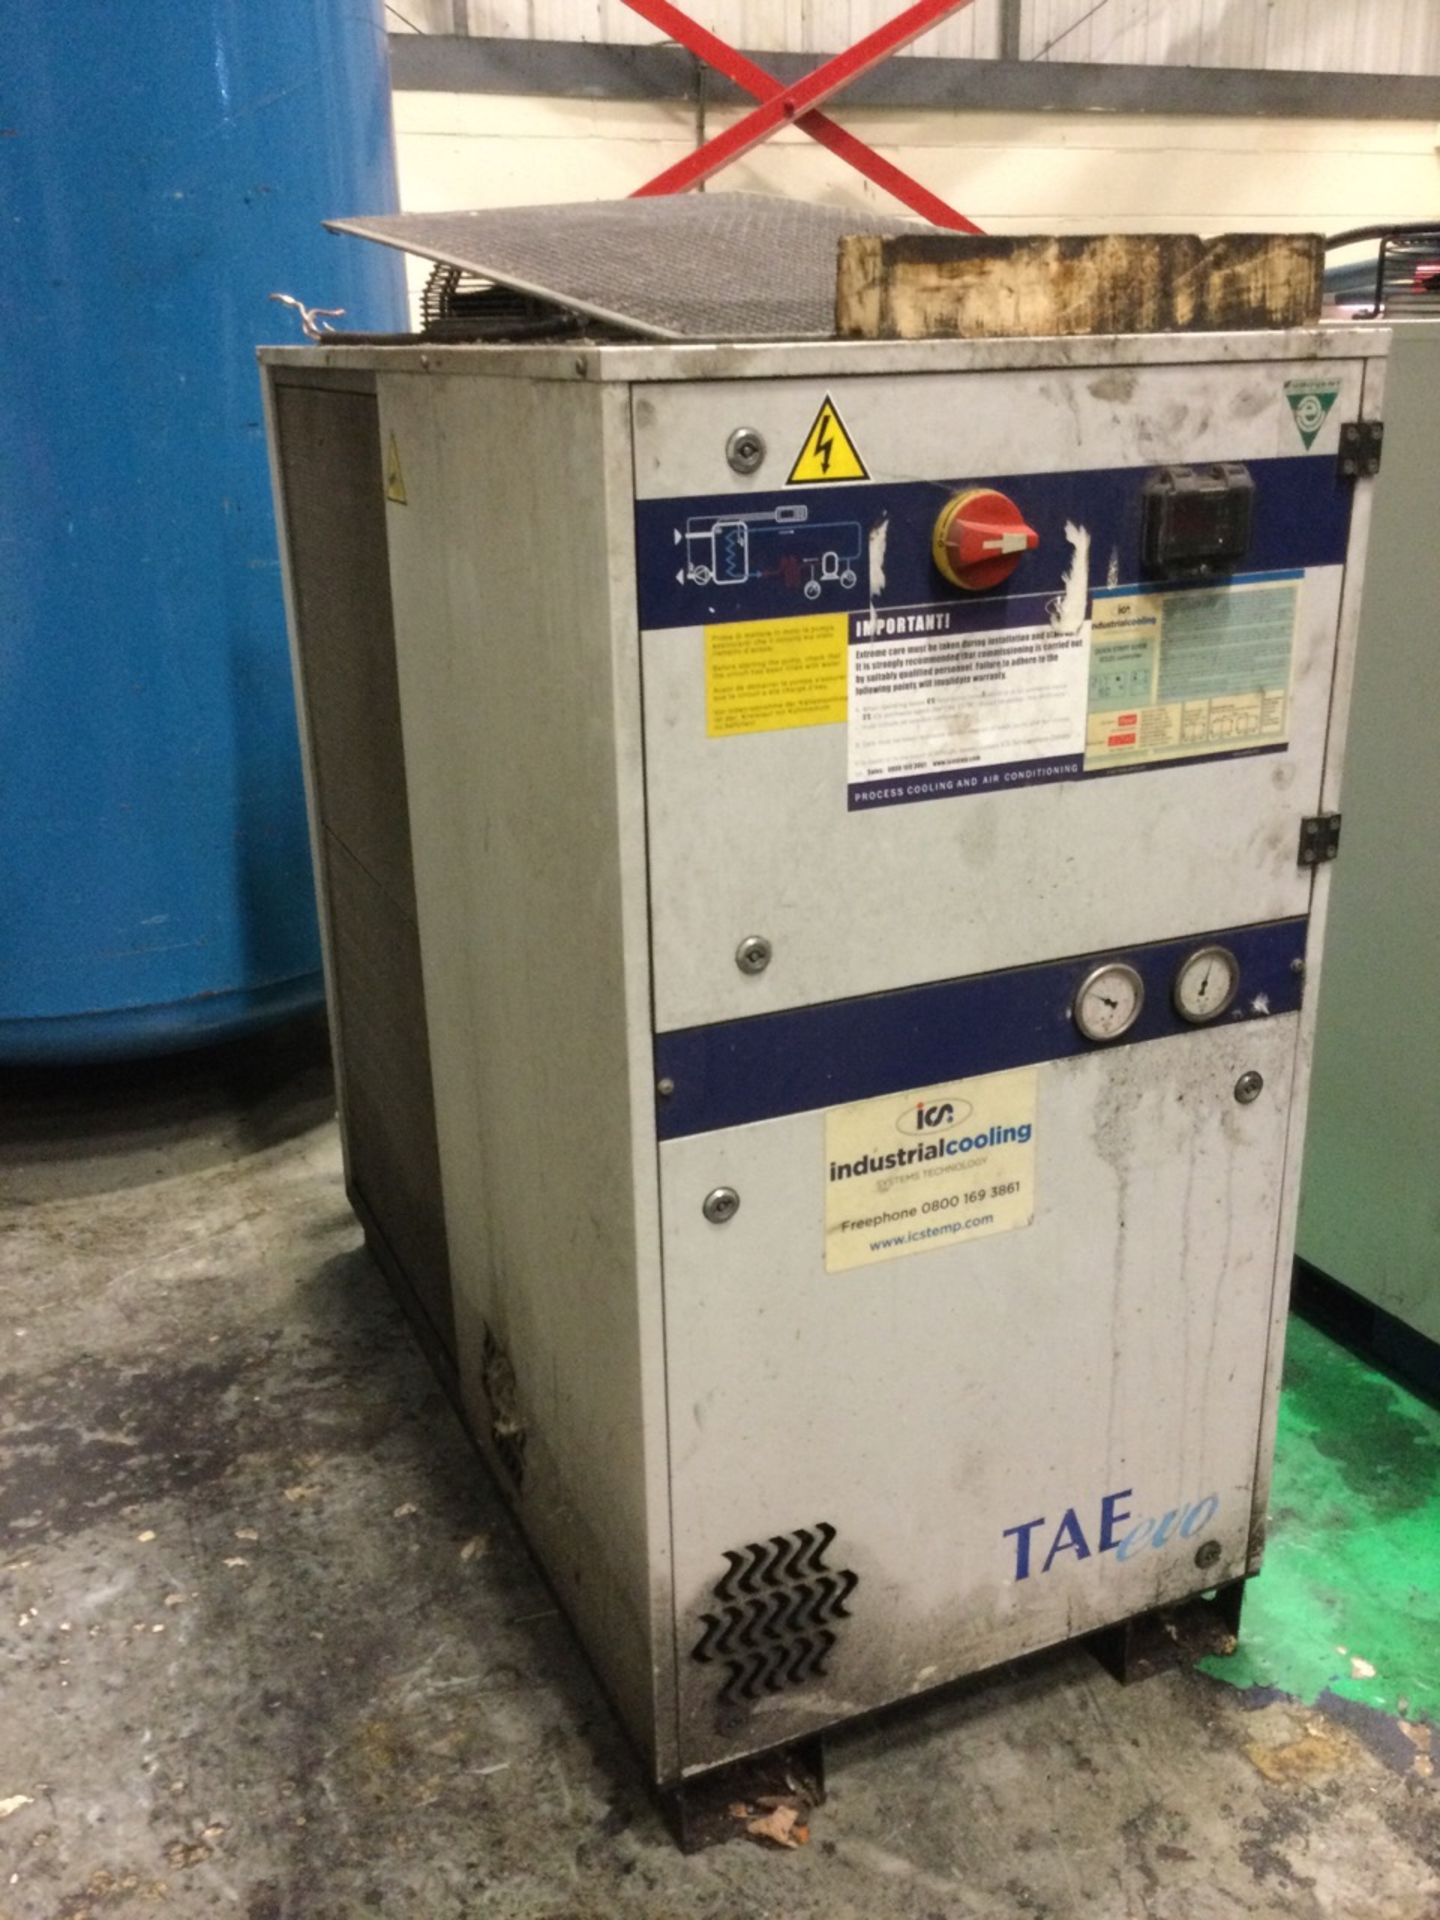 1 ICS, IC305, Water Packaged Water Chiller Unit, Disconnected, 8.3kw Rated, Serial Number: 220020127